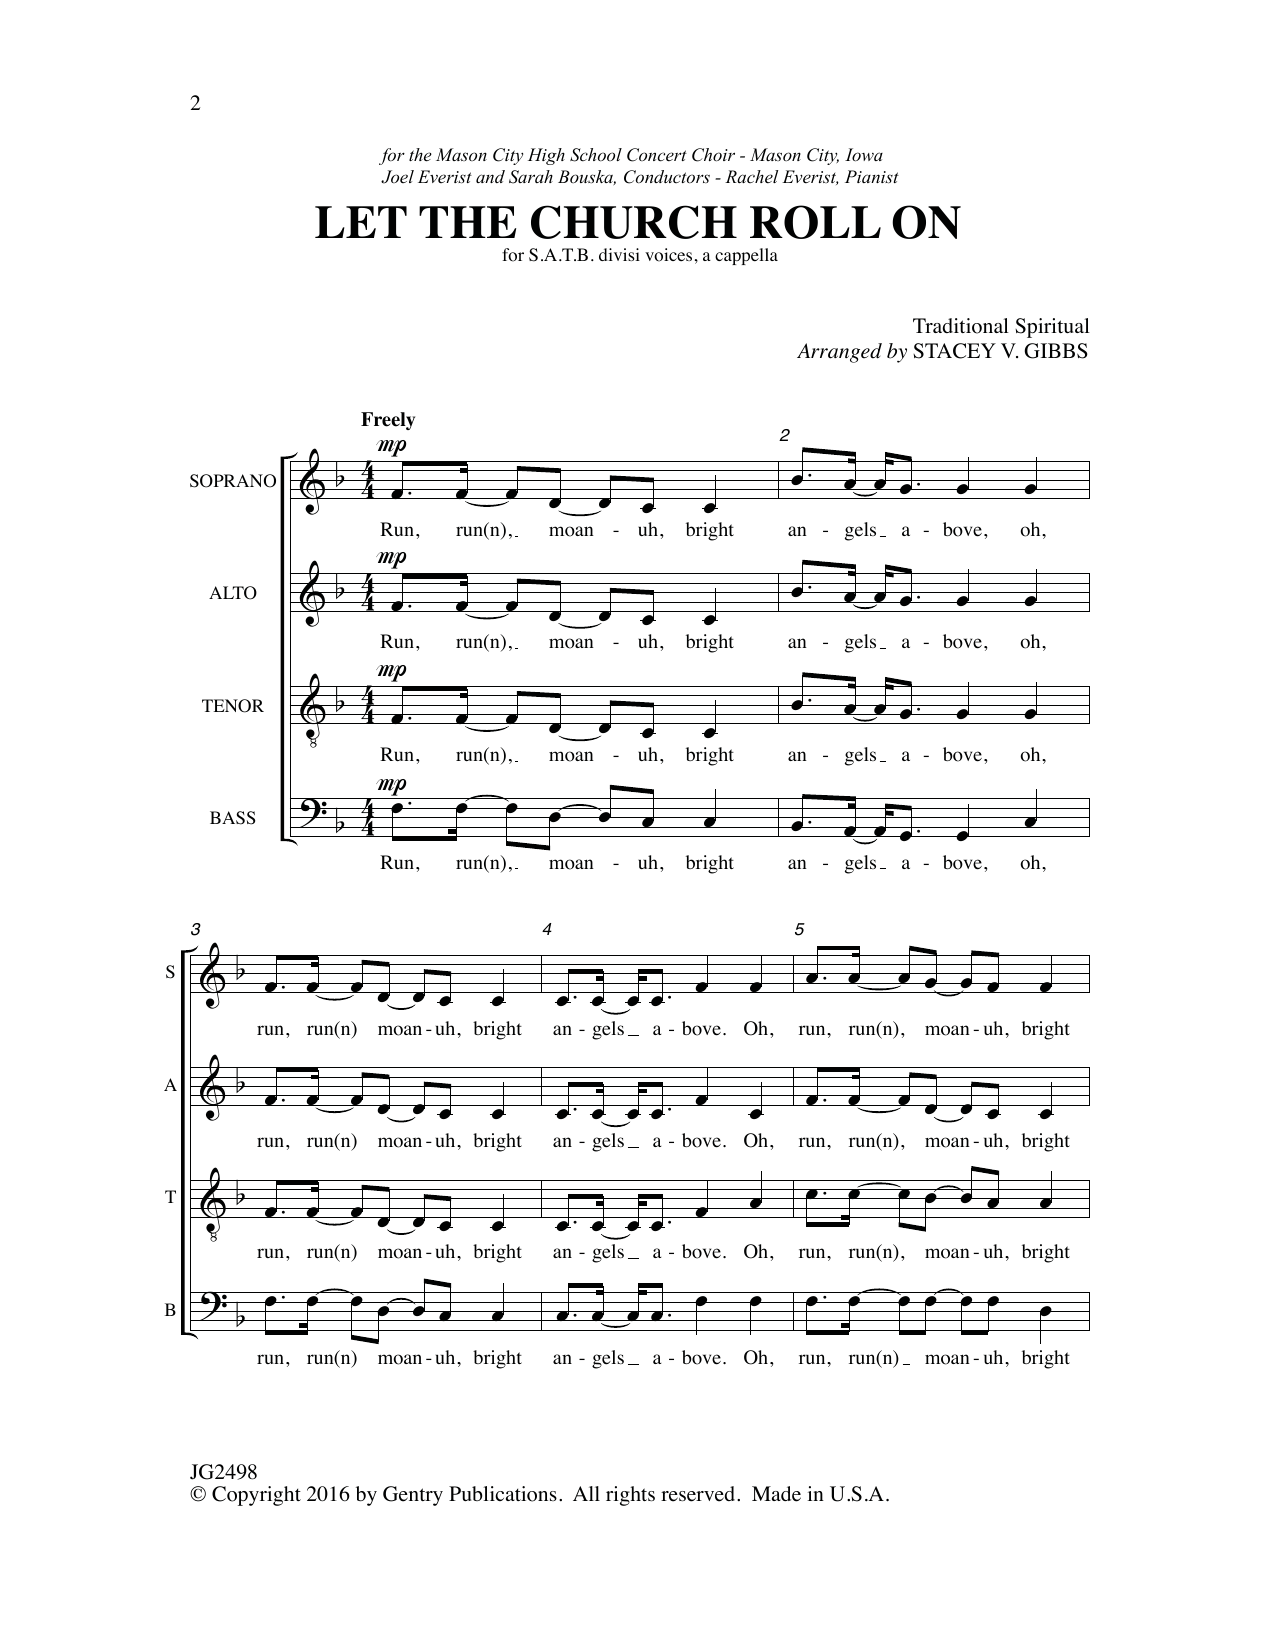 Download Stacy V. Gibbs Let the Church Roll On Sheet Music